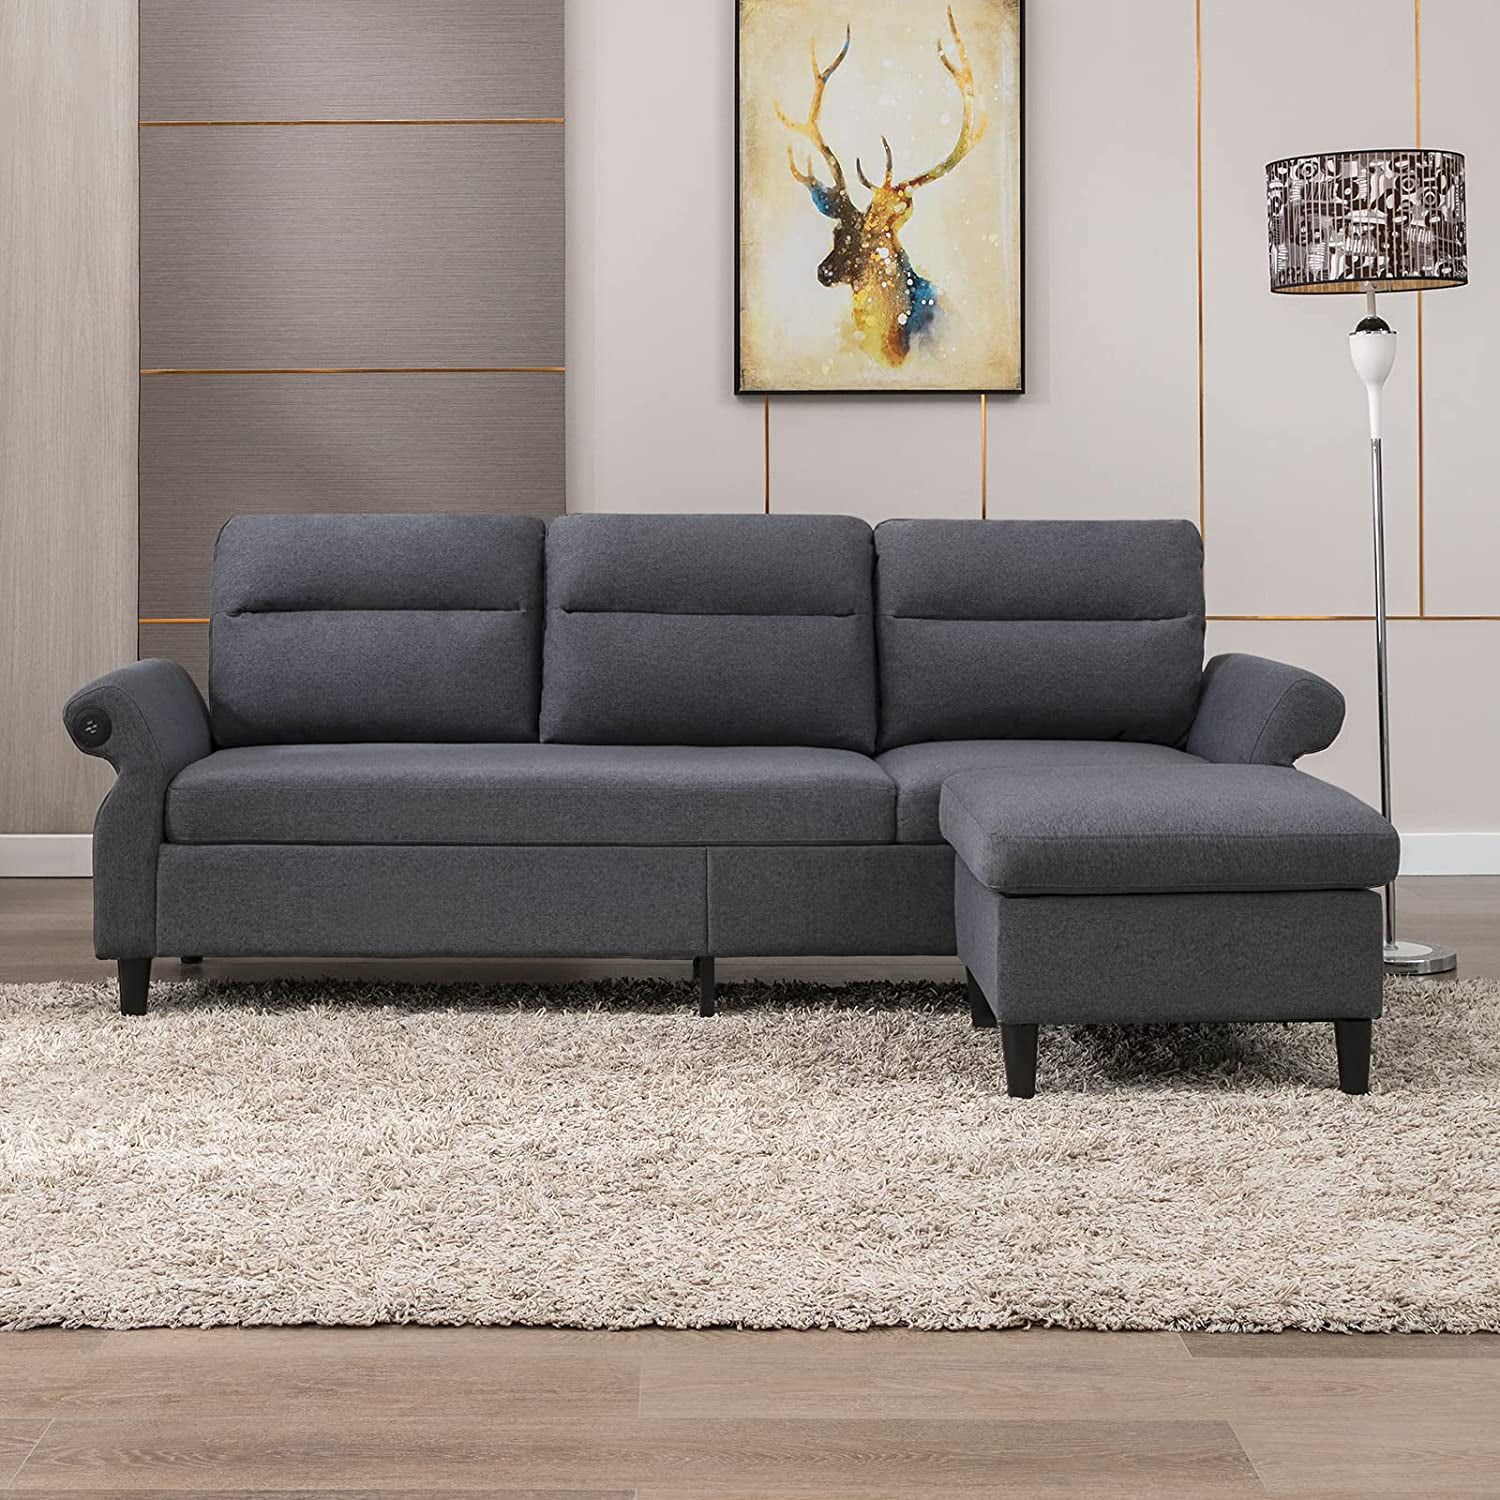 Mjkone Modern 88" W Convertible Sectional Sofa Couch With 2 Usb Ports And  Adjustable Armres,3 Seat L Shape Sofa Couch With,Ottoman For Living  Room,Apartment , Linen Fabric,Dark Grey – Walmart For 3 Seat L Shape Sofa Couches With 2 Usb Ports (Photo 7 of 15)